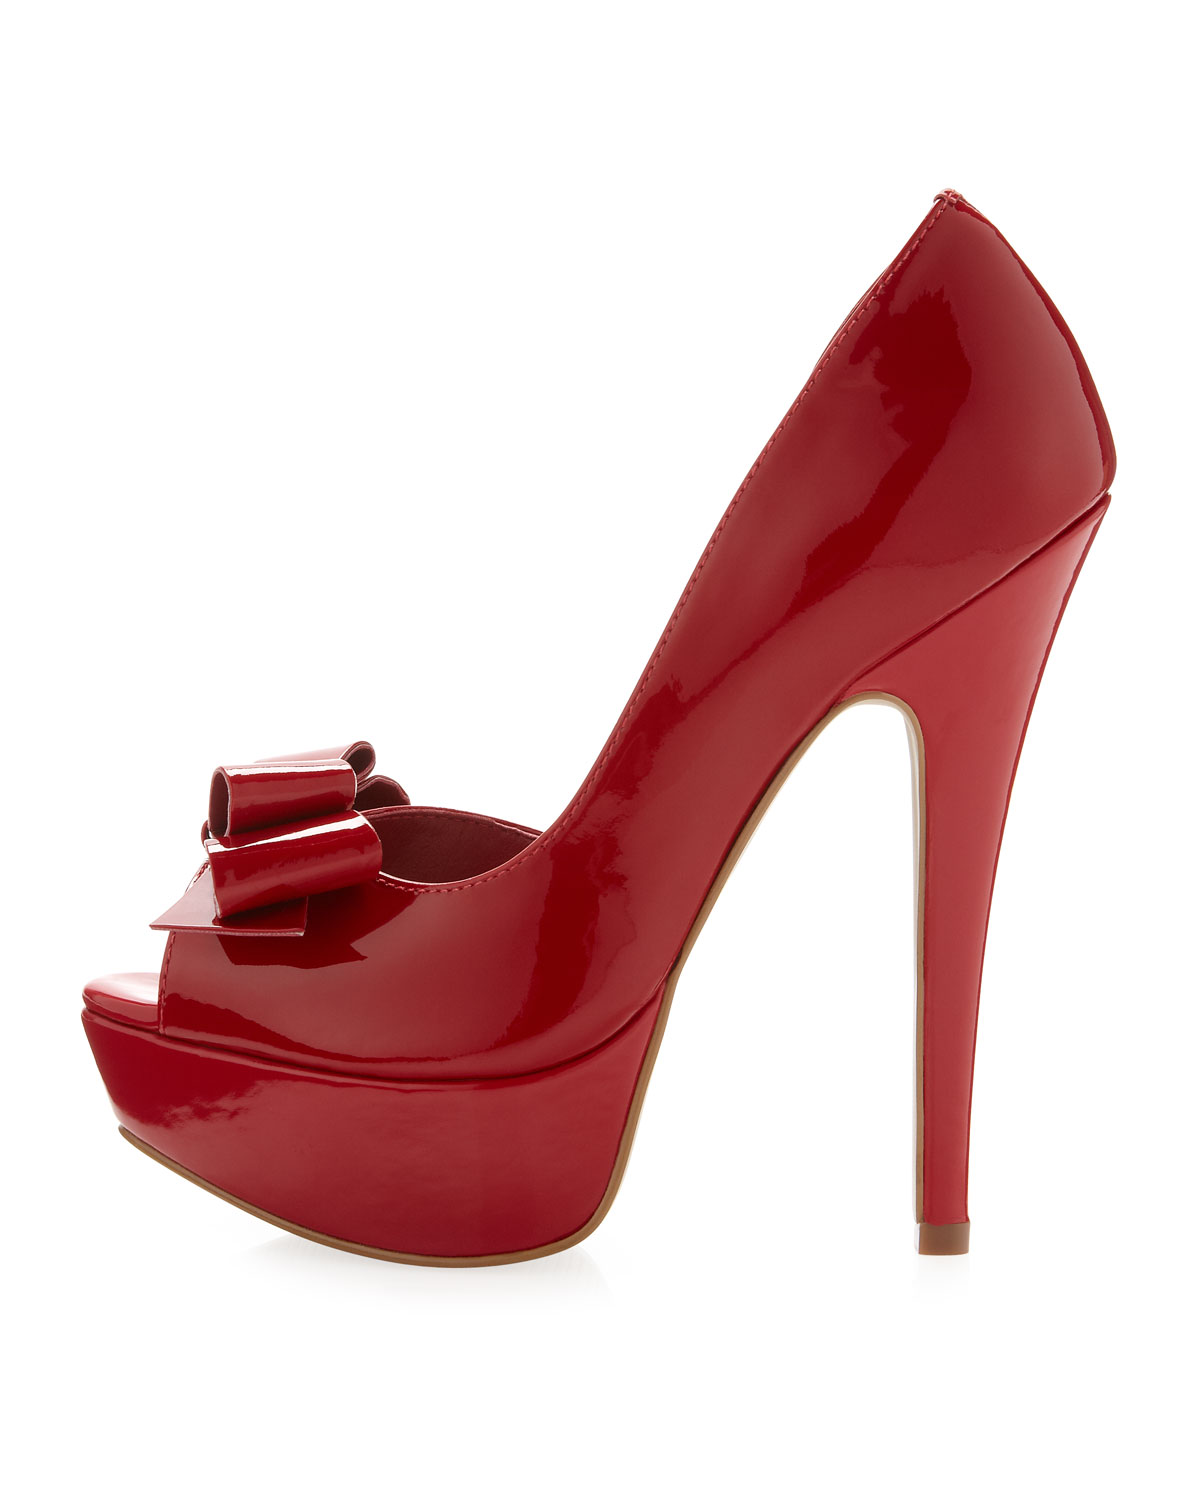 Steven by Steve Madden Ariall Patent Bow Pump in Red - Lyst